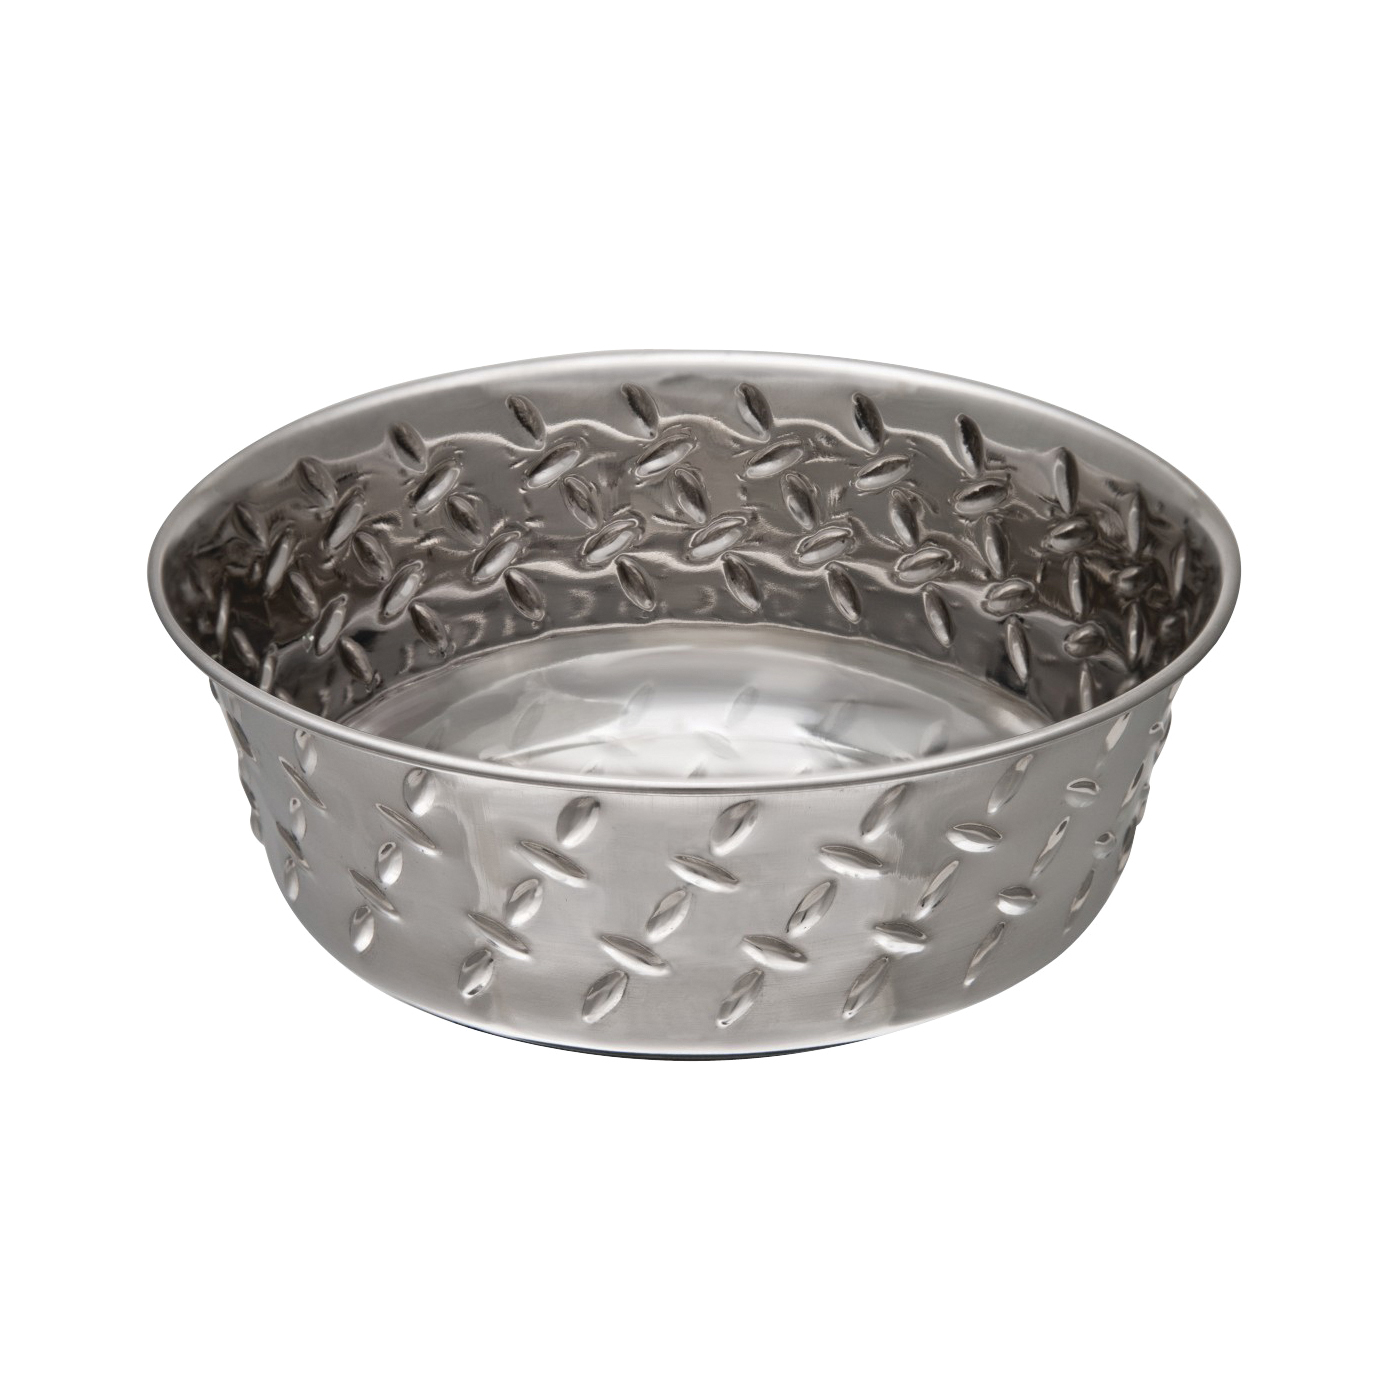 7258 Pet Feeding Dish, 5 qt Volume, Stainless Steel, Silver